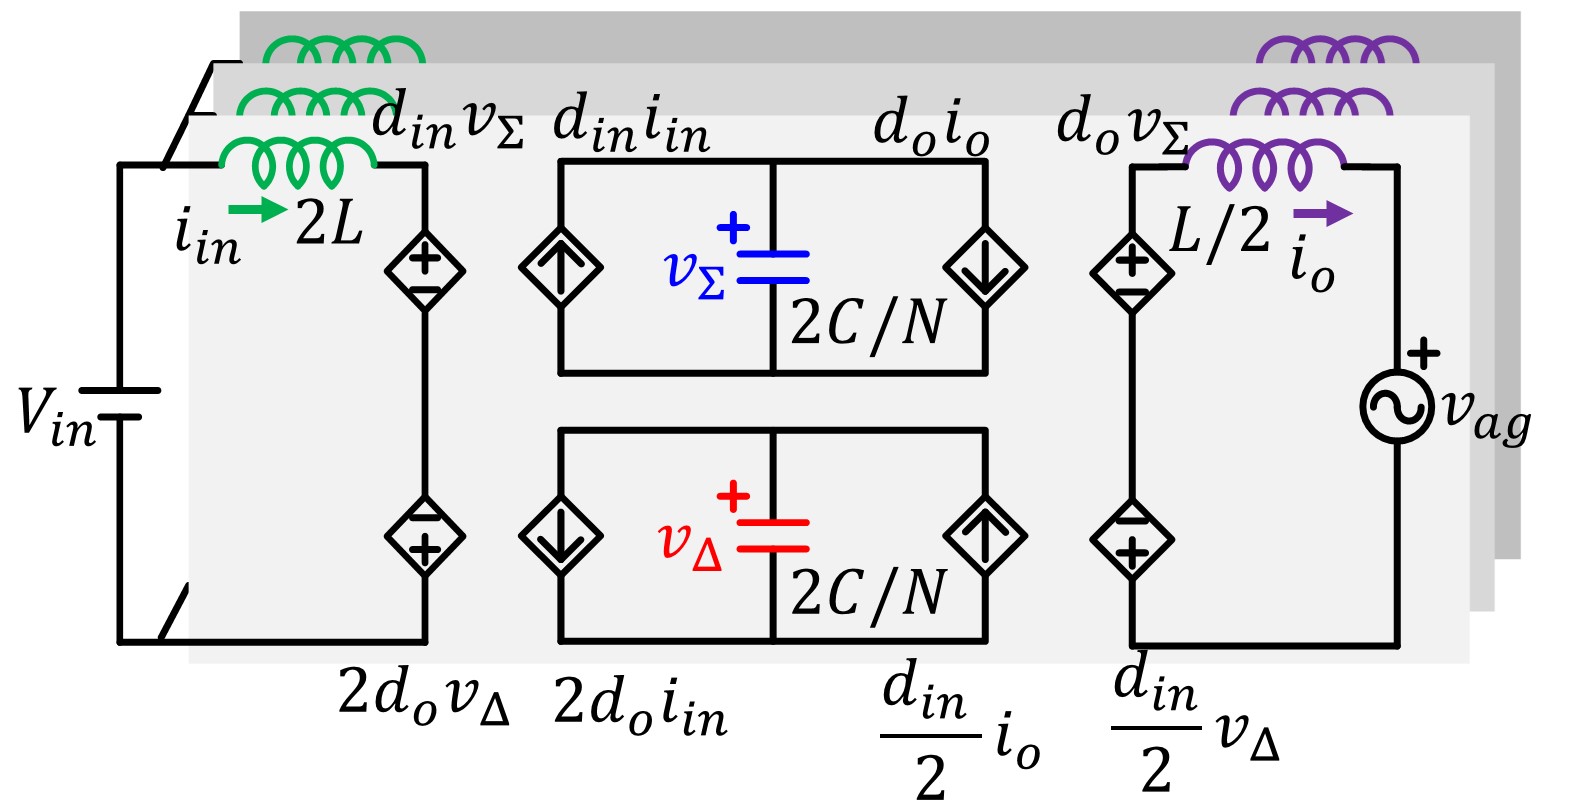 Image of proposed decoupled ΣΔ model.